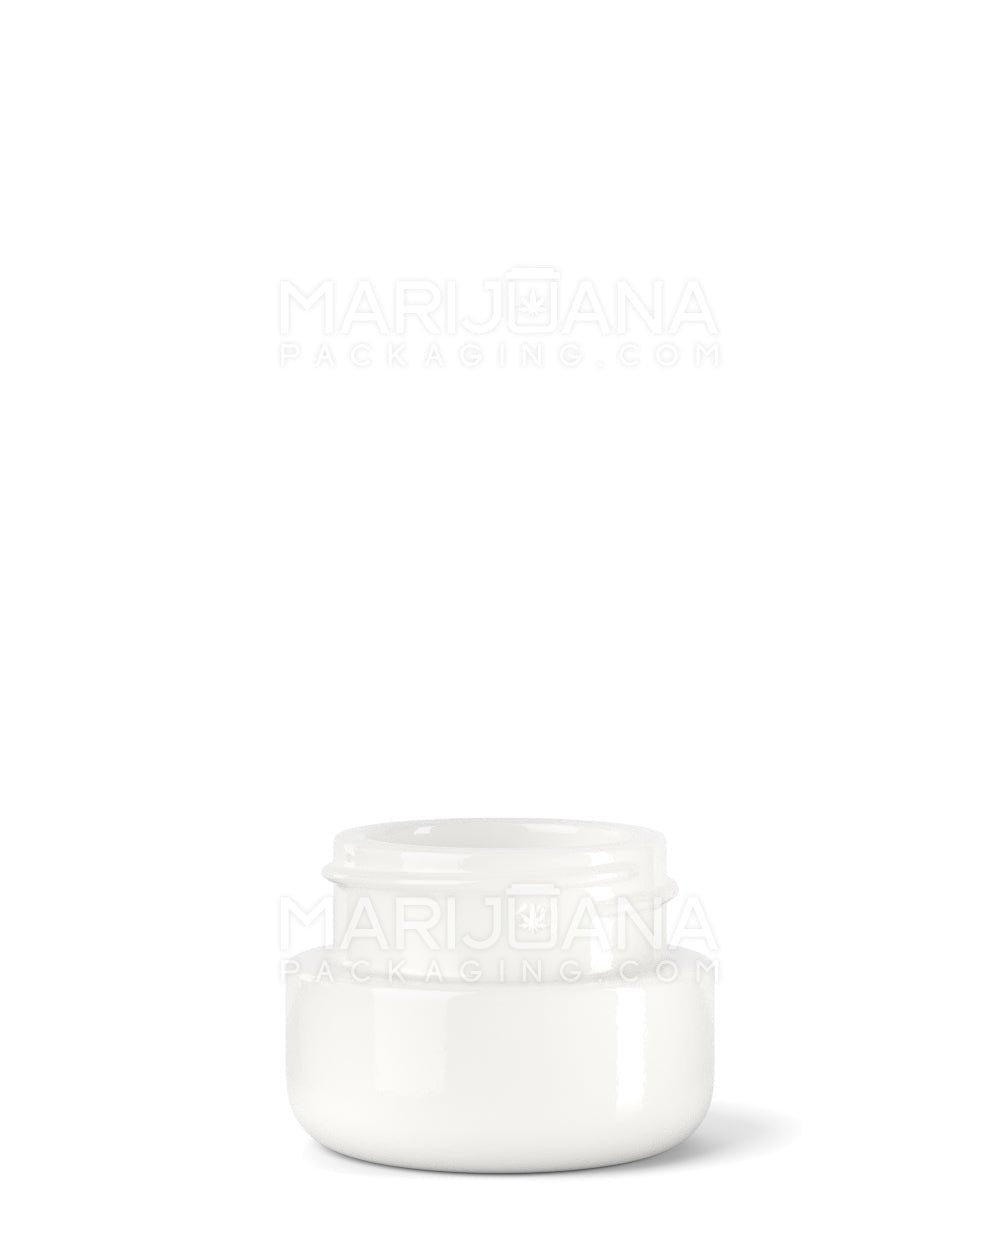 POLLEN GEAR | HiLine Glossy White Glass Concentrate Containers | 28mm - 5mL - 308 Count - 1